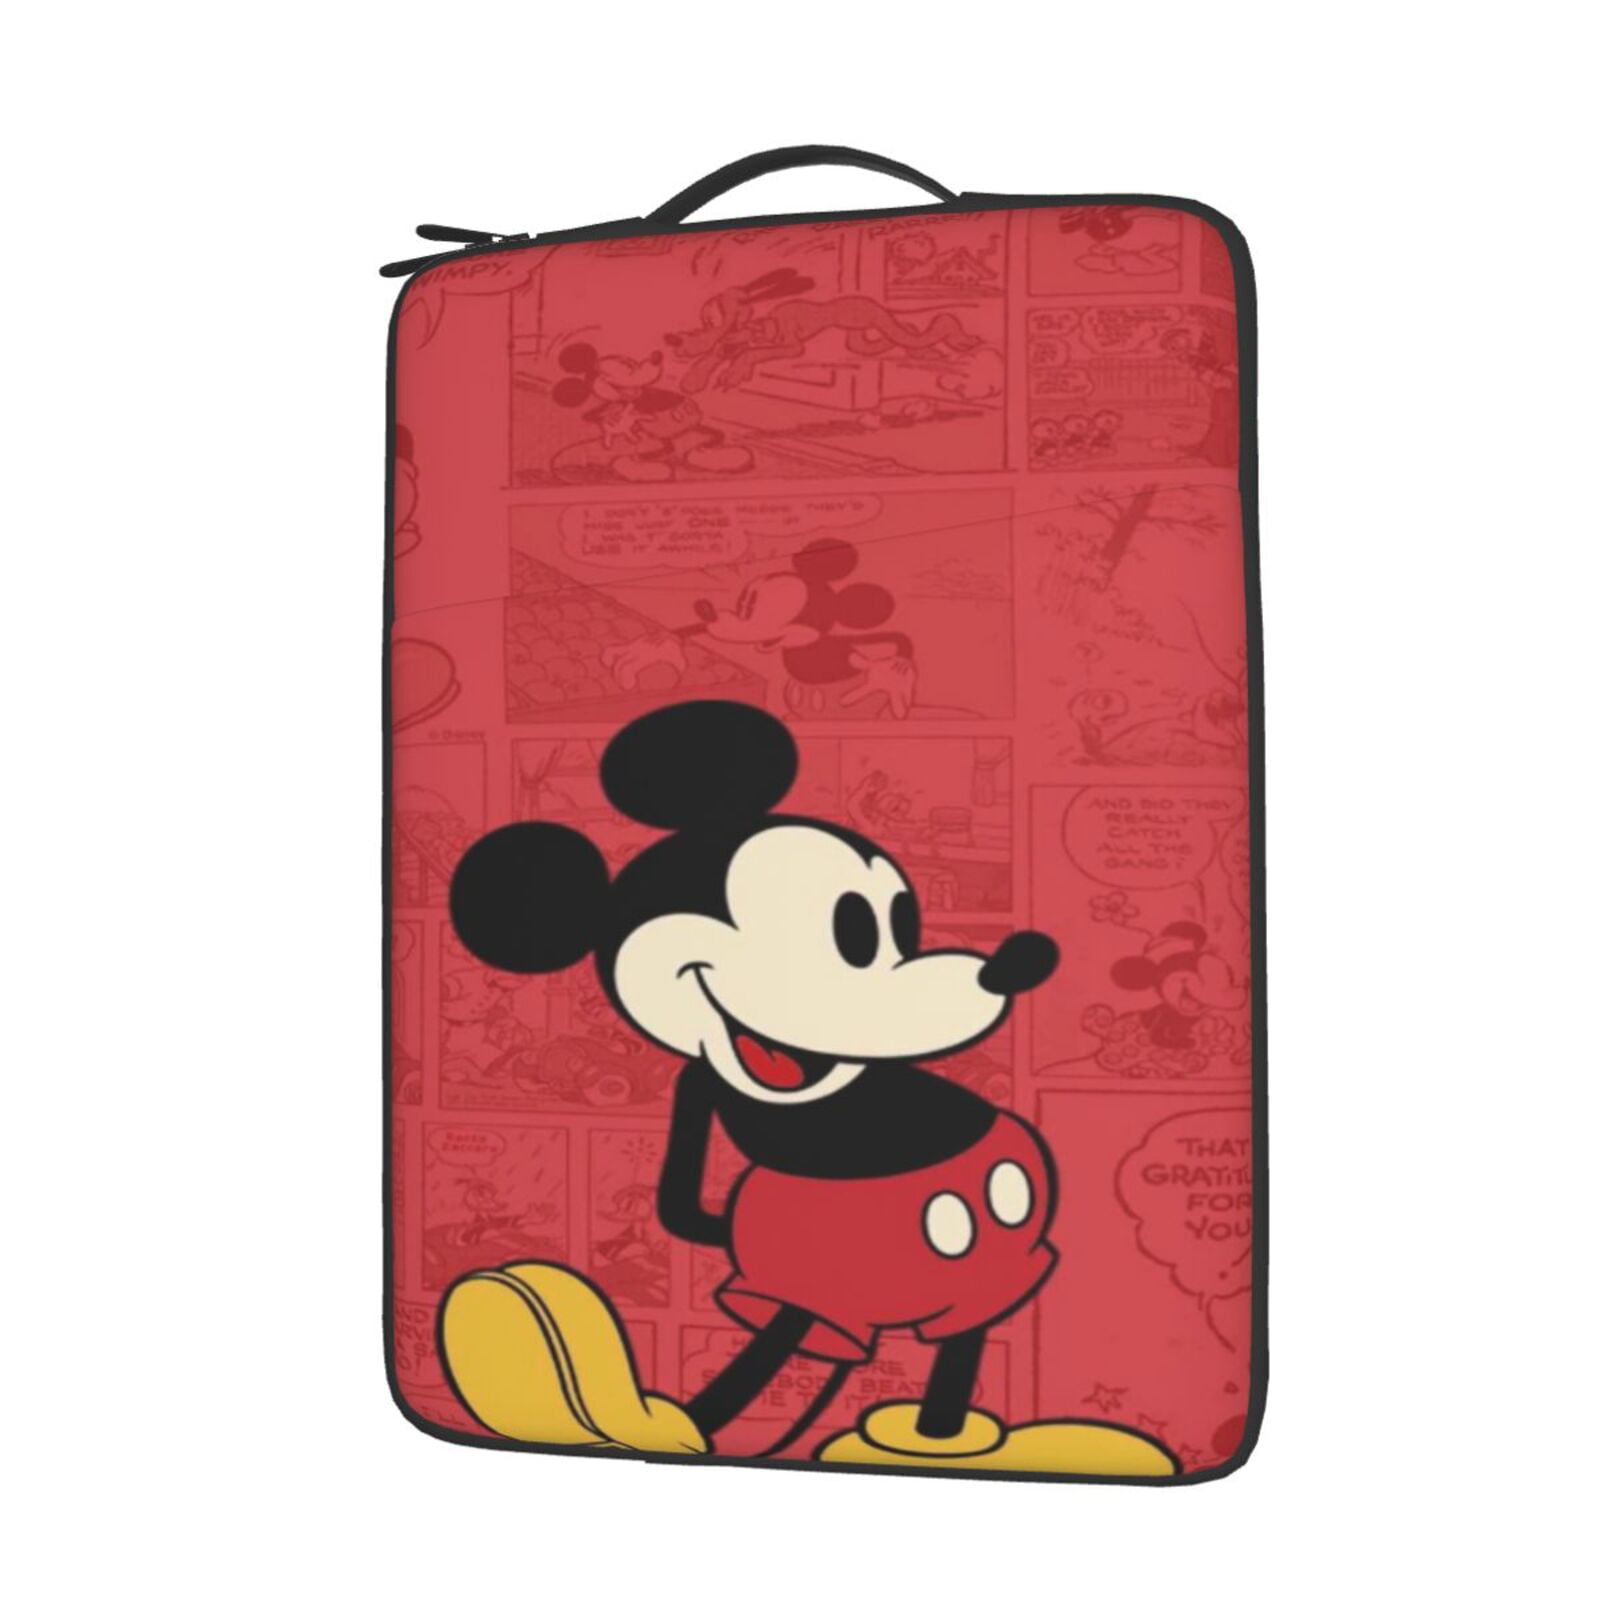 Mickey-Mouse 13-Inch to 15-Inch Laptop Sleeve Case Waterproof Notebook Computer Bag-Light and Comfortable Tablet Briefcase-Band Zipper Portable Handbag 13 Inch